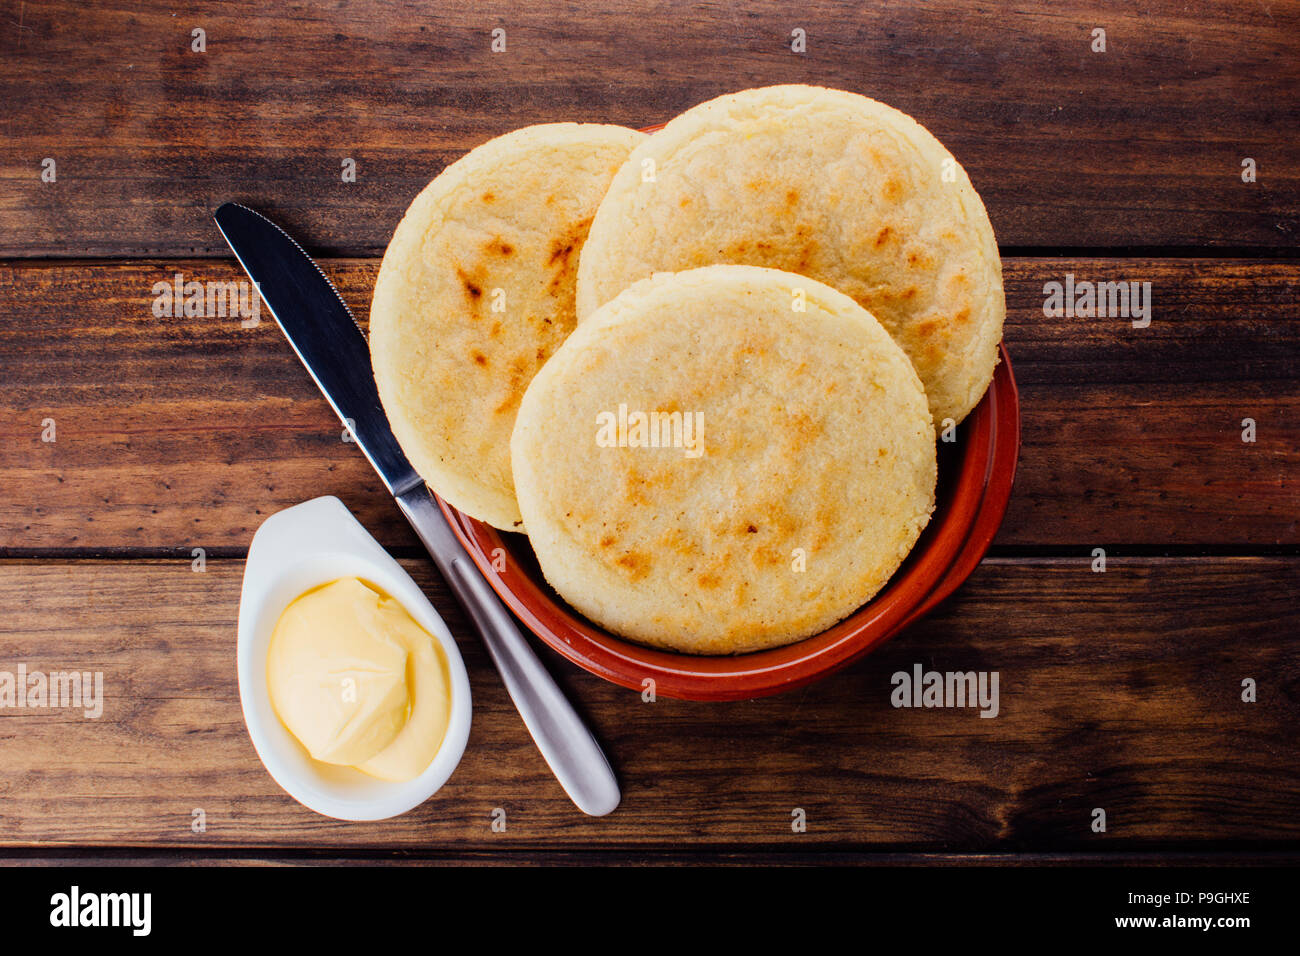 https://c8.alamy.com/comp/P9GHXE/plate-with-arepas-and-butter-aside-on-a-rustic-wooden-background-a-typical-food-in-south-american-countries-such-as-colombia-and-venezuela-P9GHXE.jpg